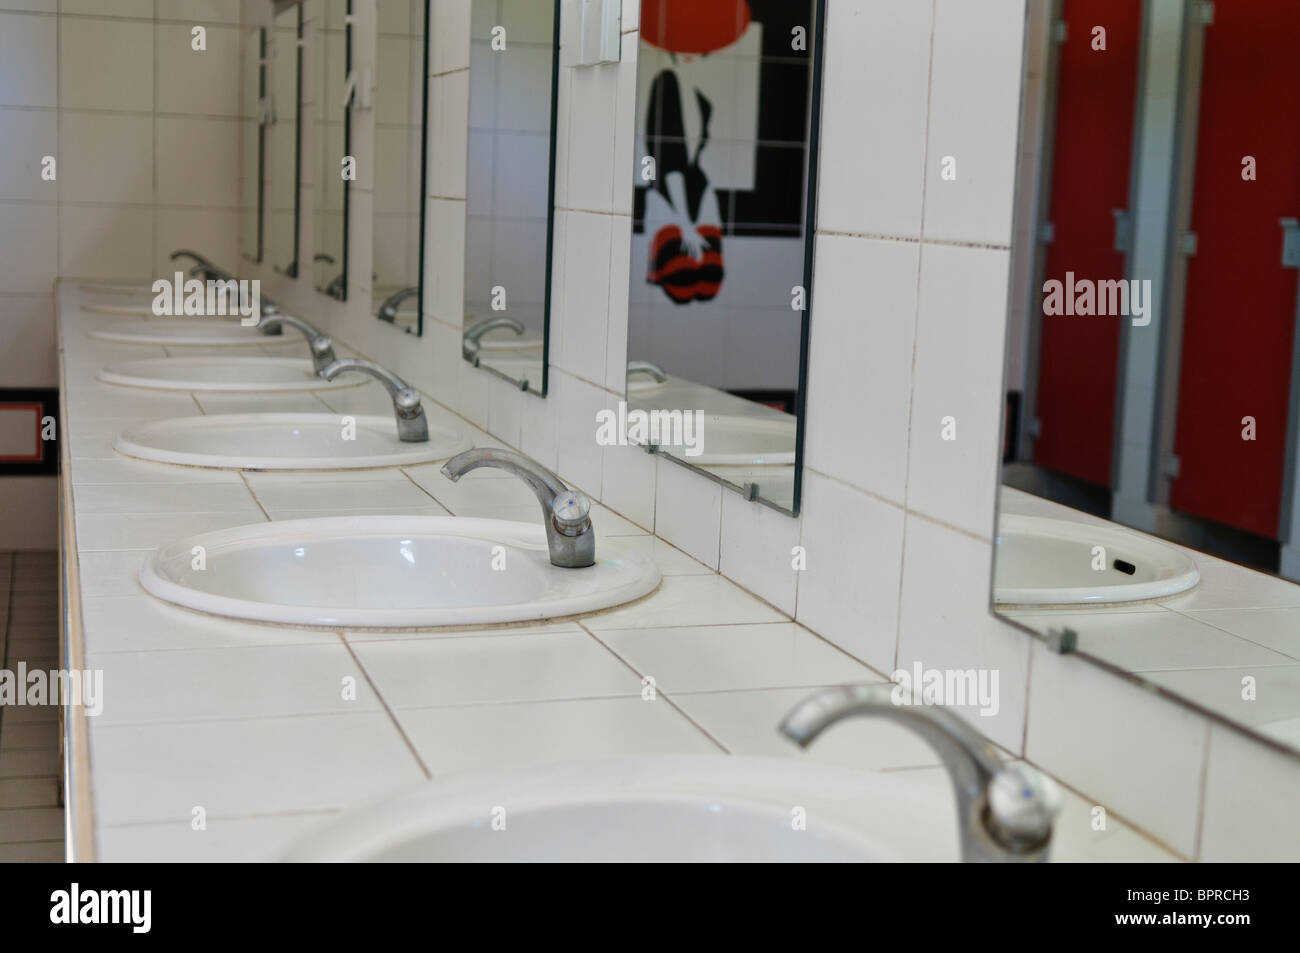 Sinks in a French gents toilet block. Stock Photo